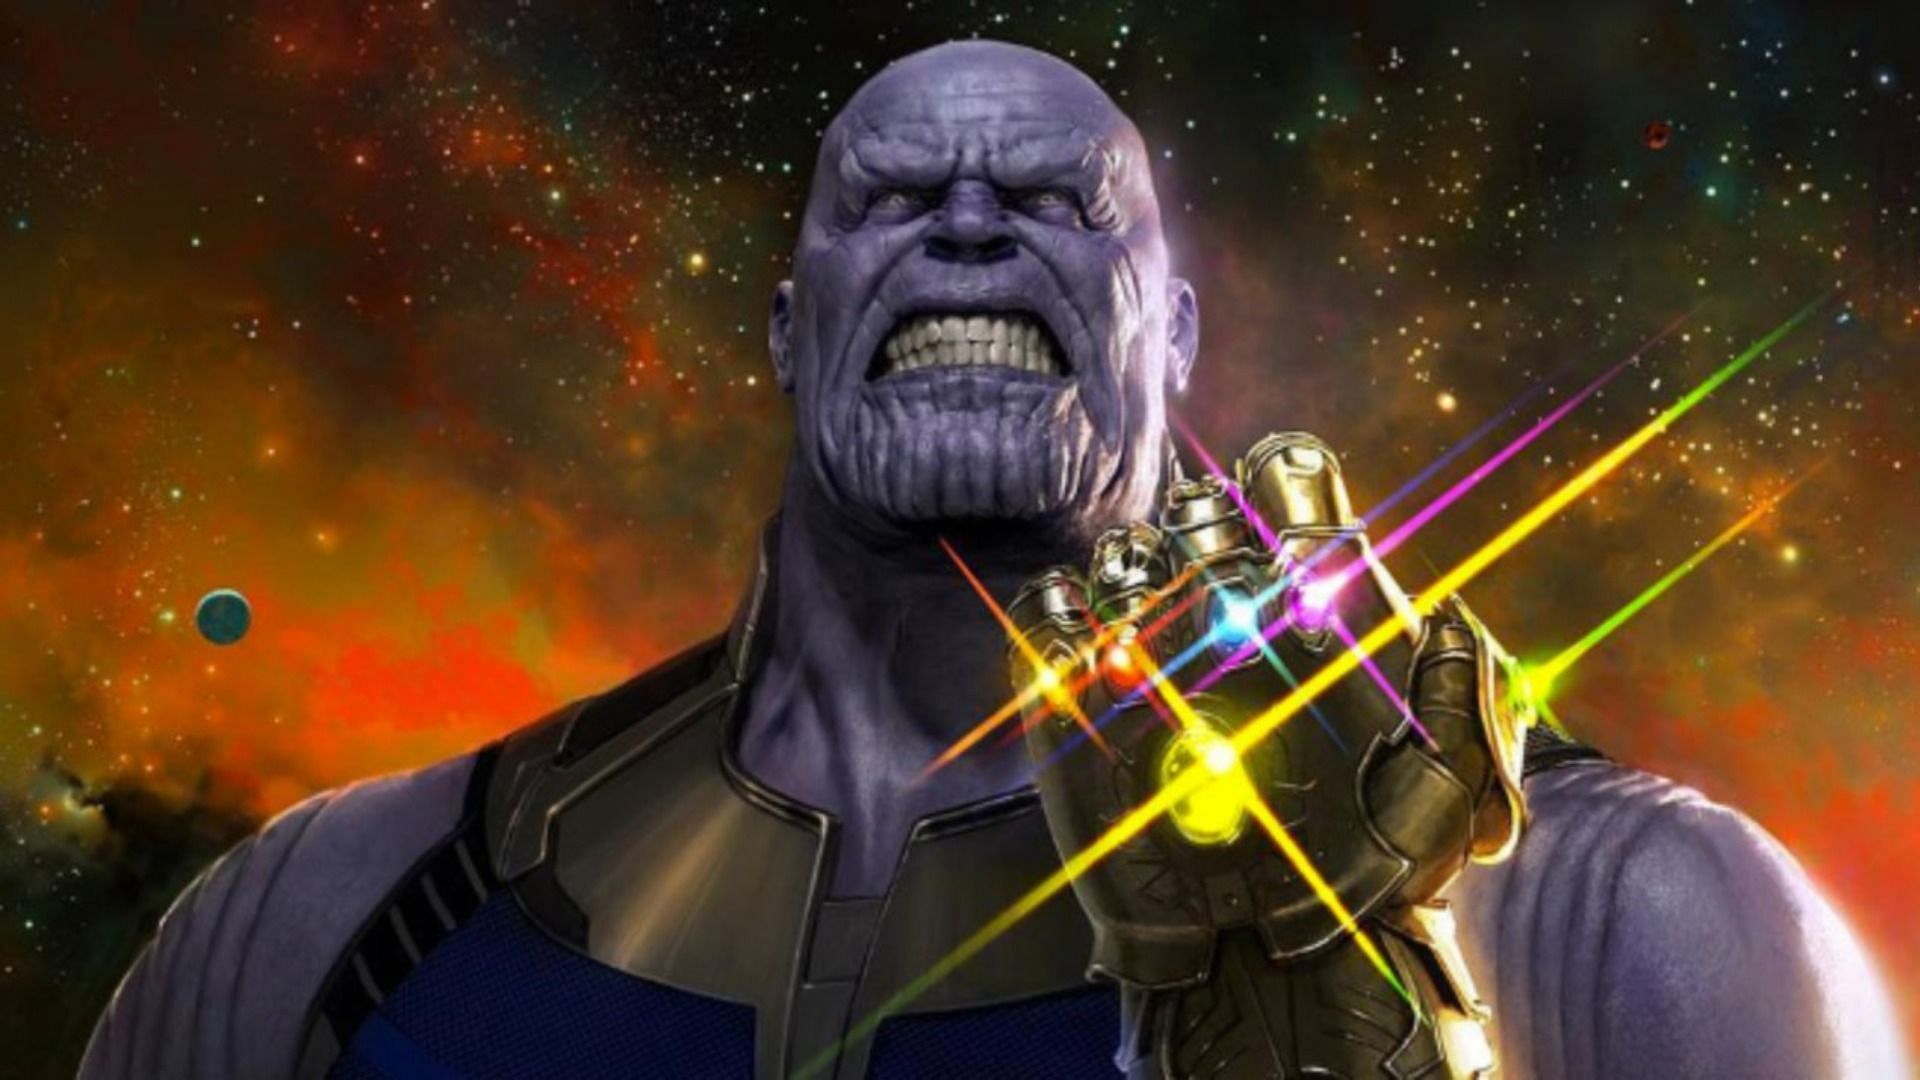 Thanos with the Infity Gauntlet can give a rough time to even the most powerful superheroes (Image via Marvel)